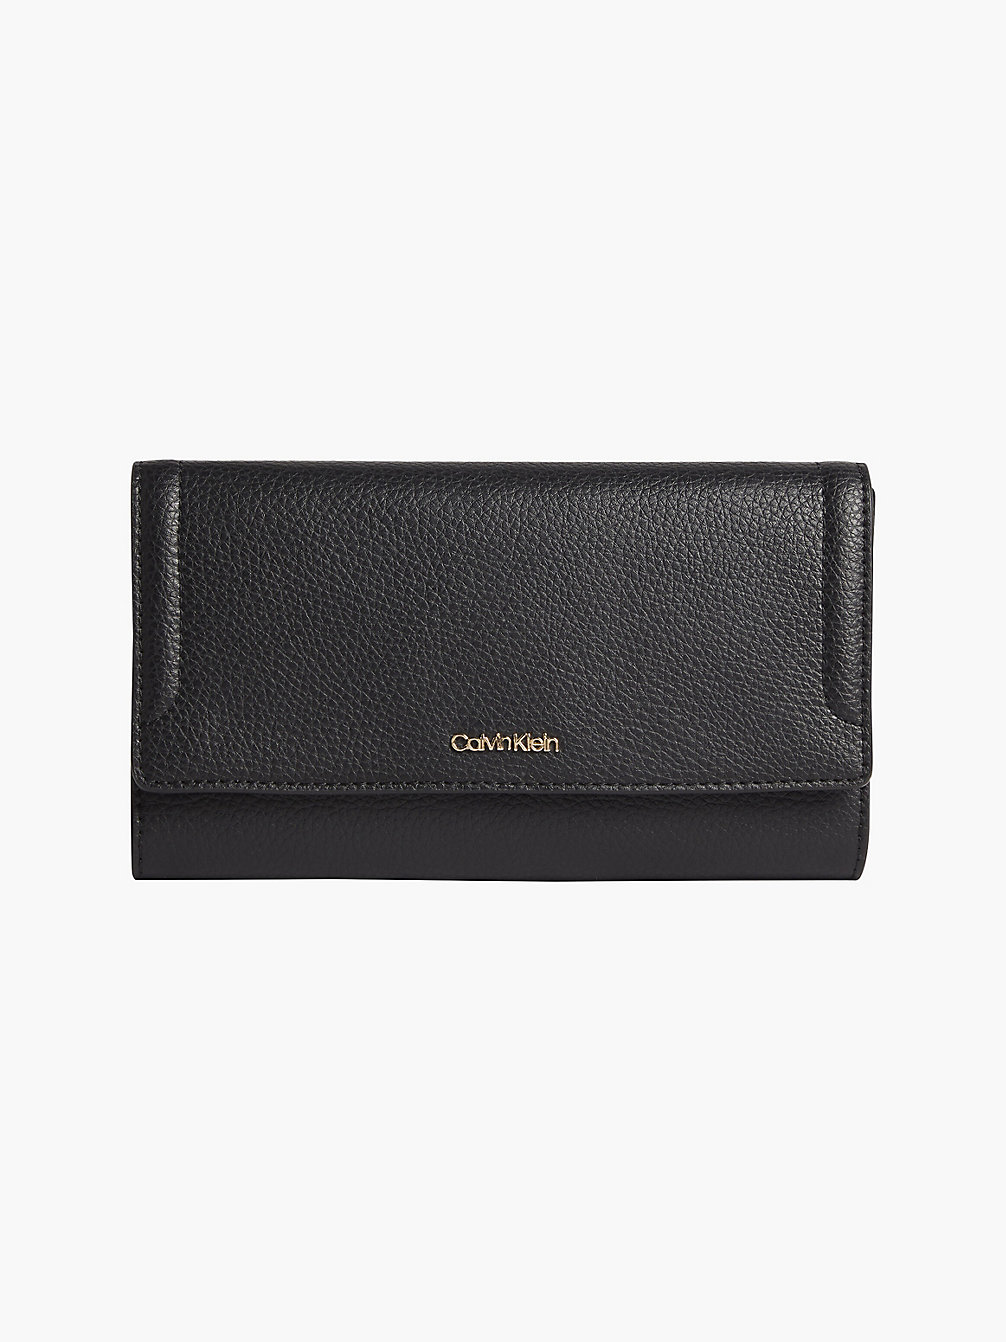 CK BLACK Recycled Trifold Rfid Wallet undefined women Calvin Klein